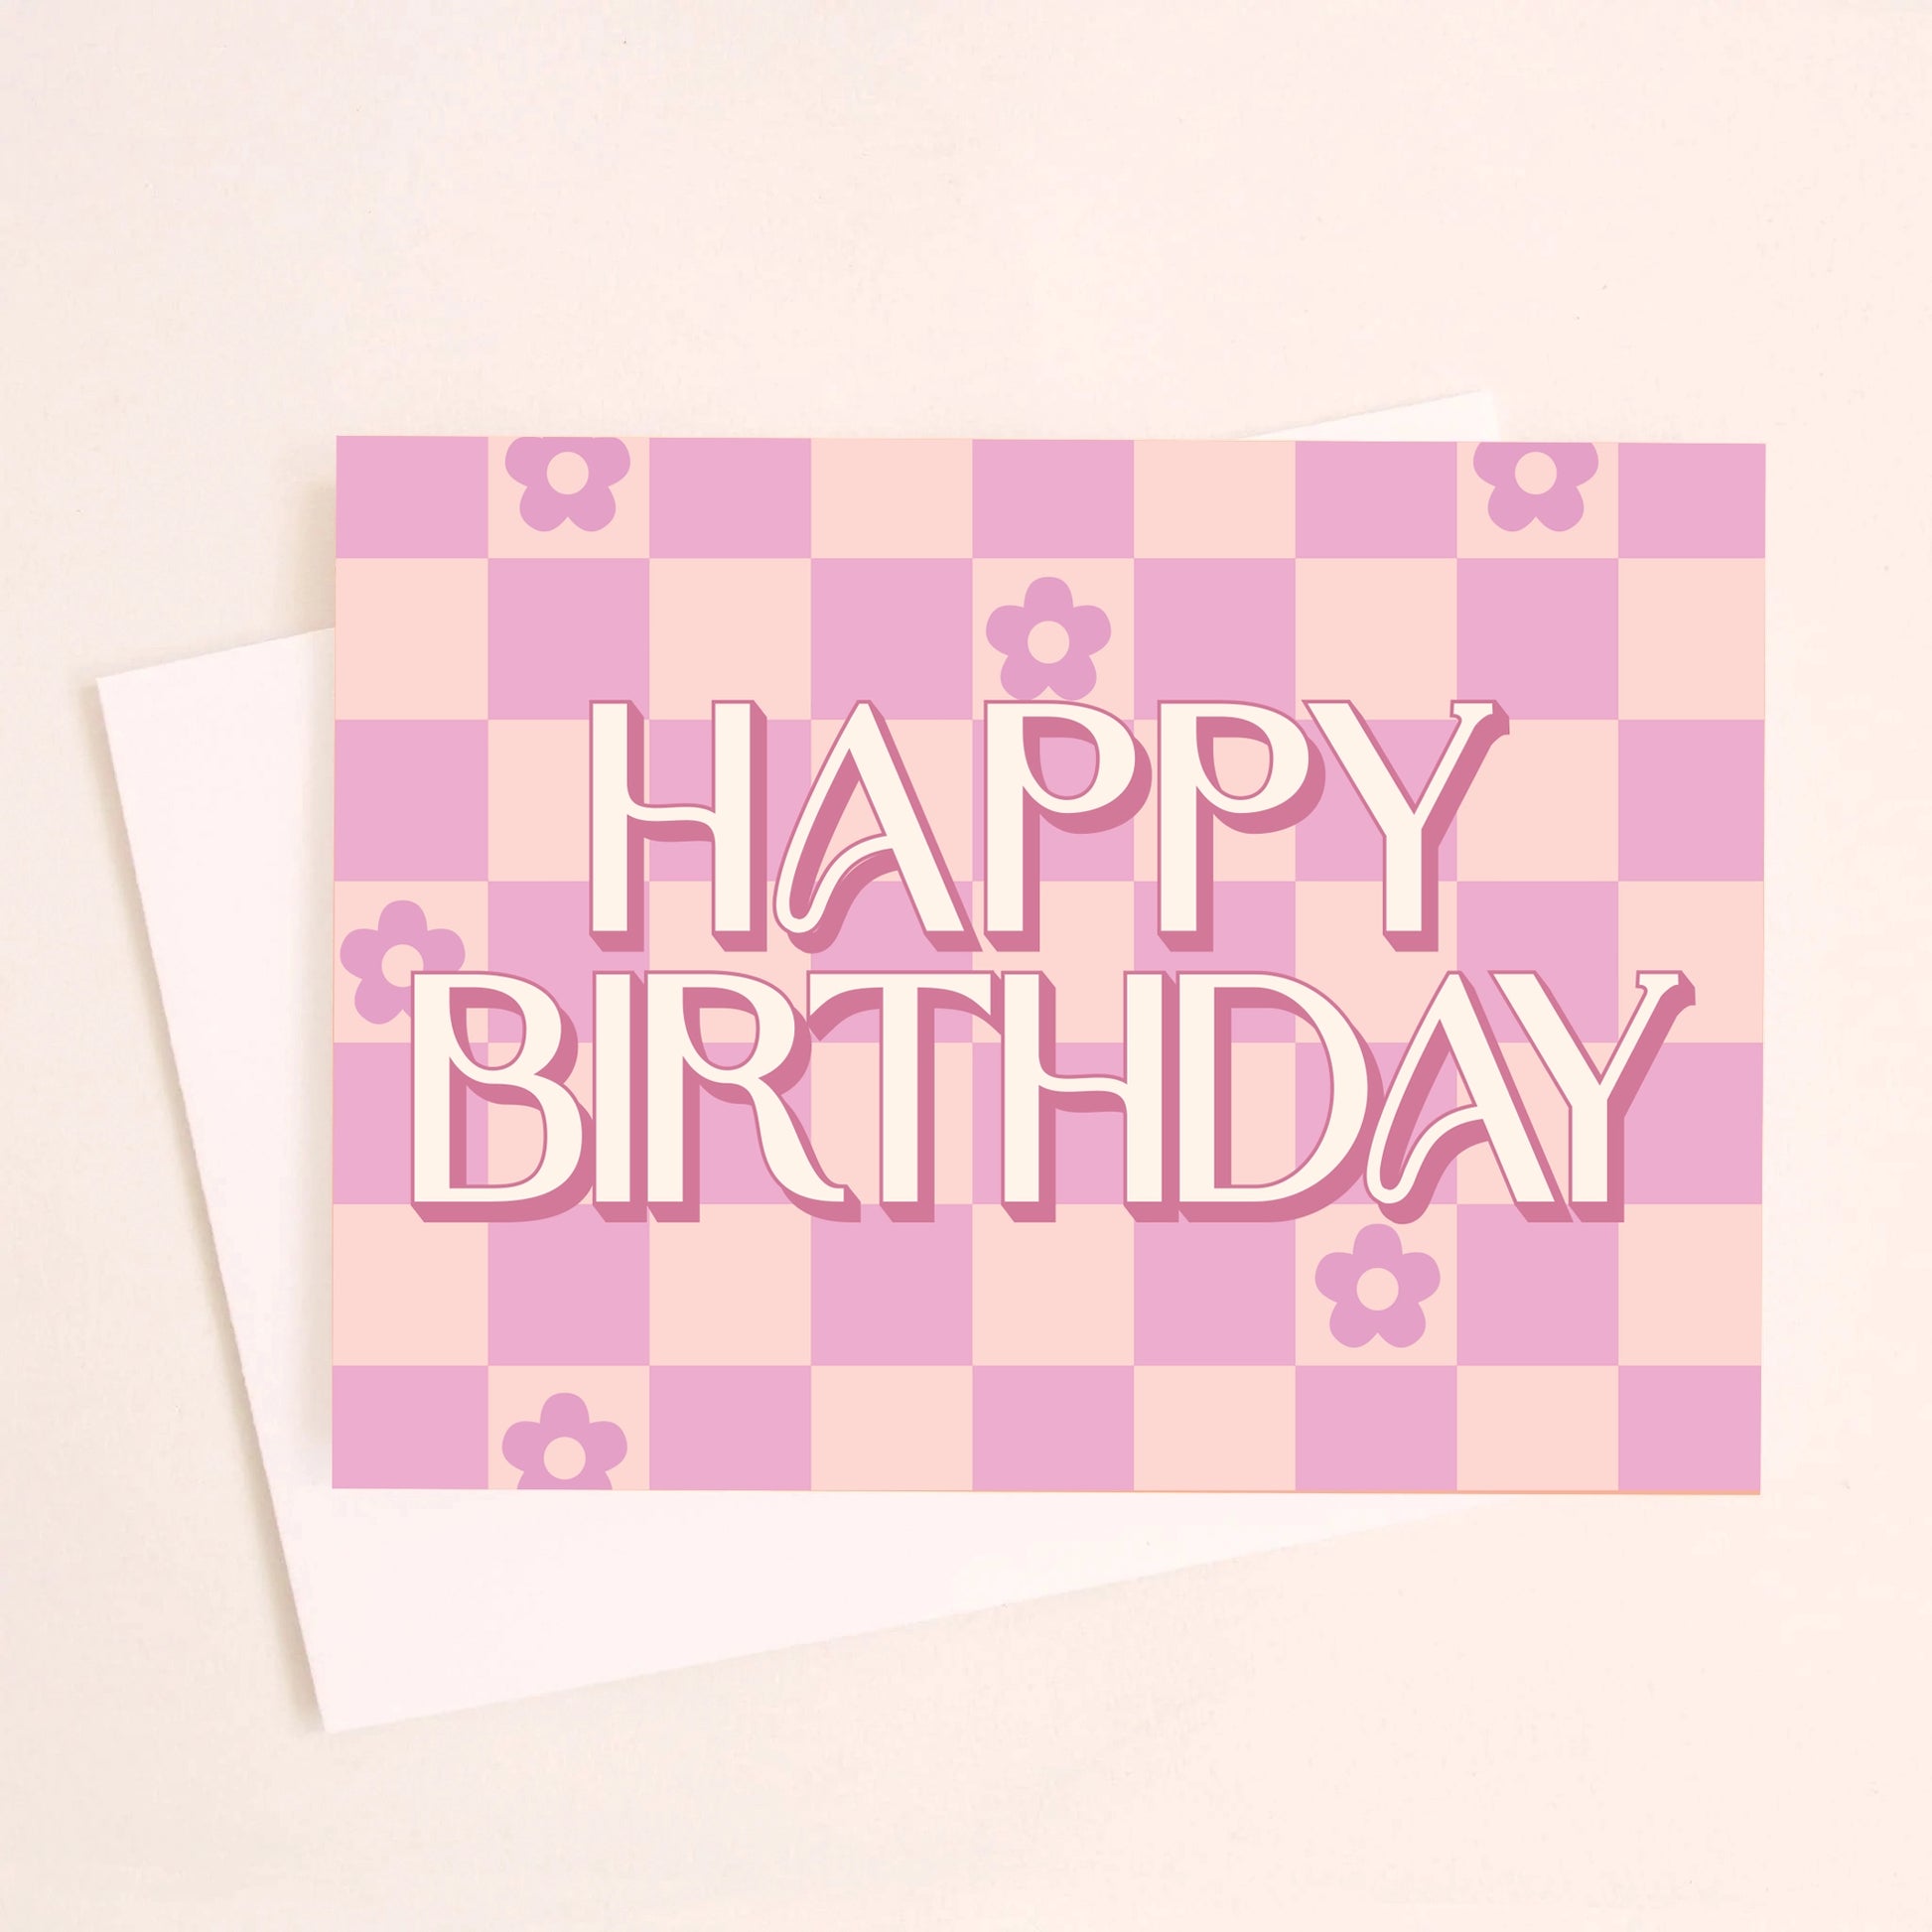 On a peachy background is a hot pink and light pink checkered greeting card with flowers in six of the checker squares along with text in the center that reads, "Happy Birthday". 